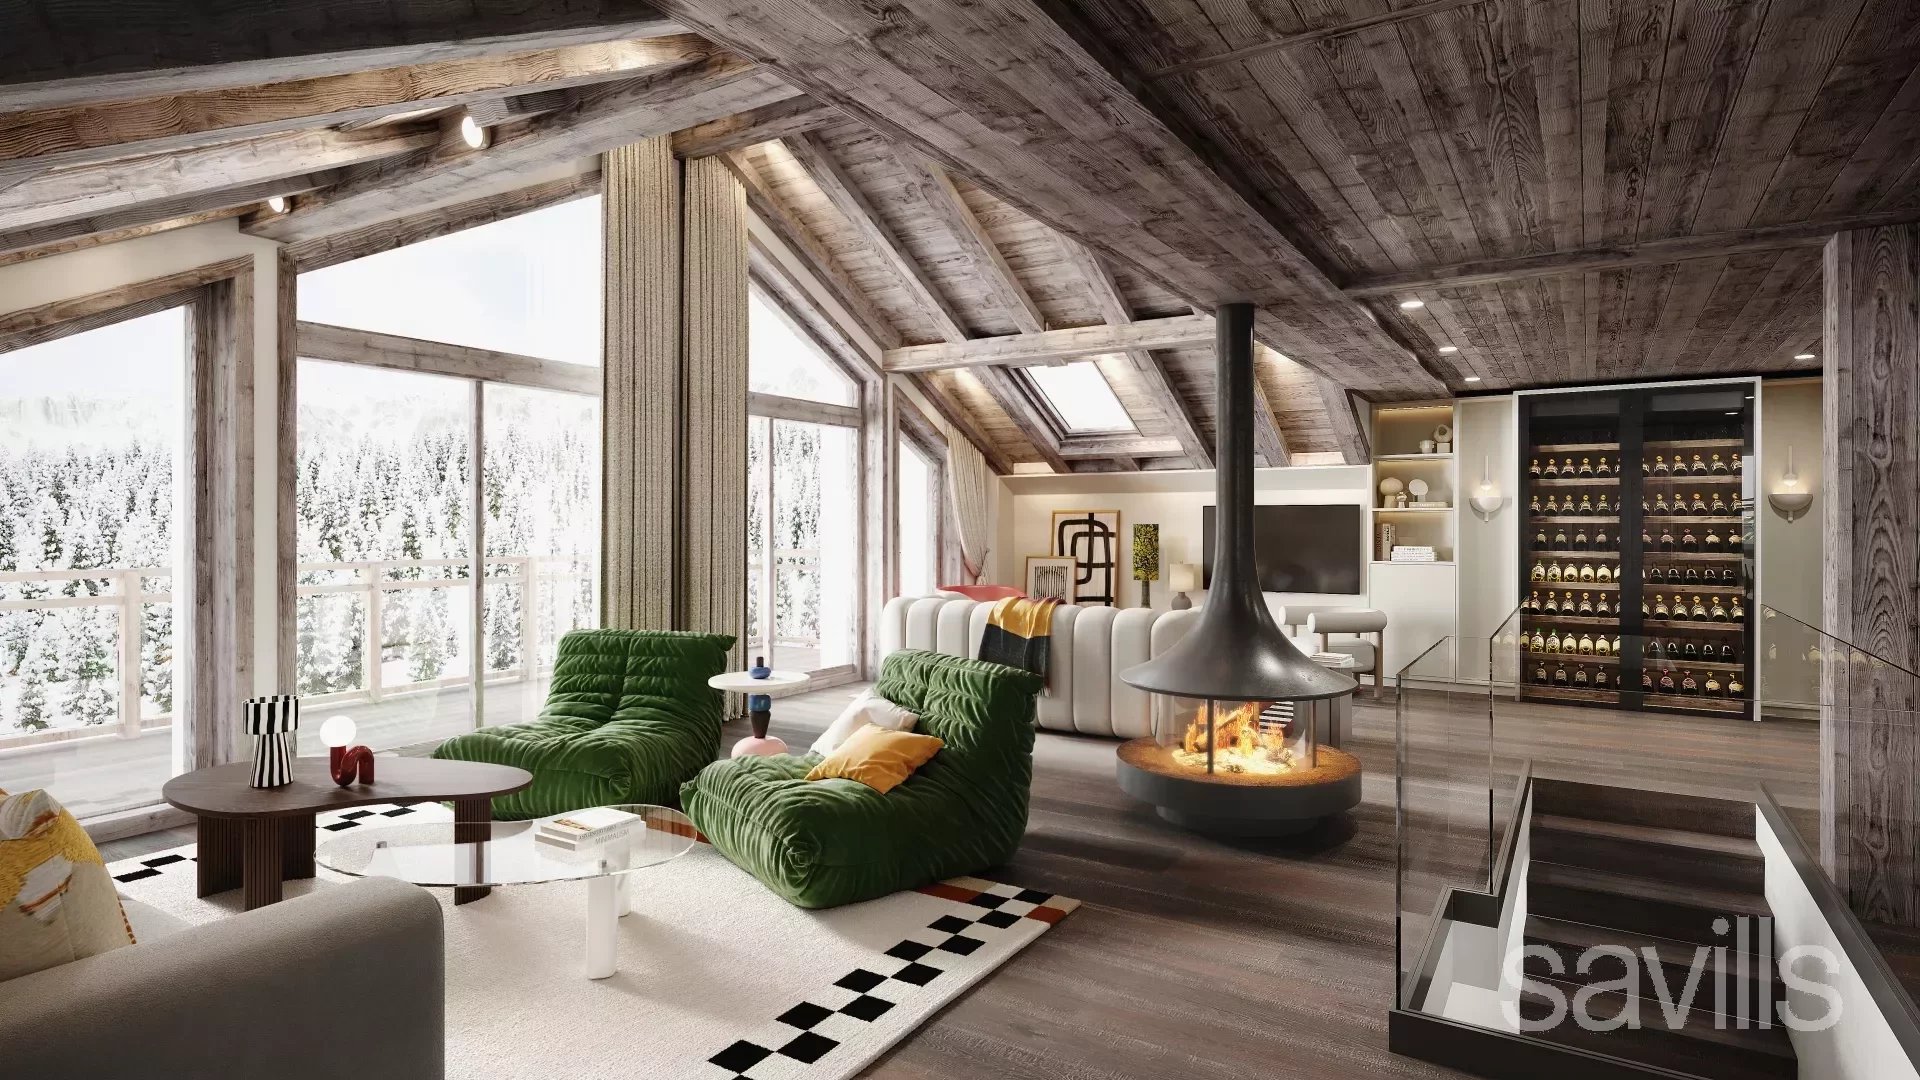 Luxury five bedroom chalet ideally placed for the ski slopes.